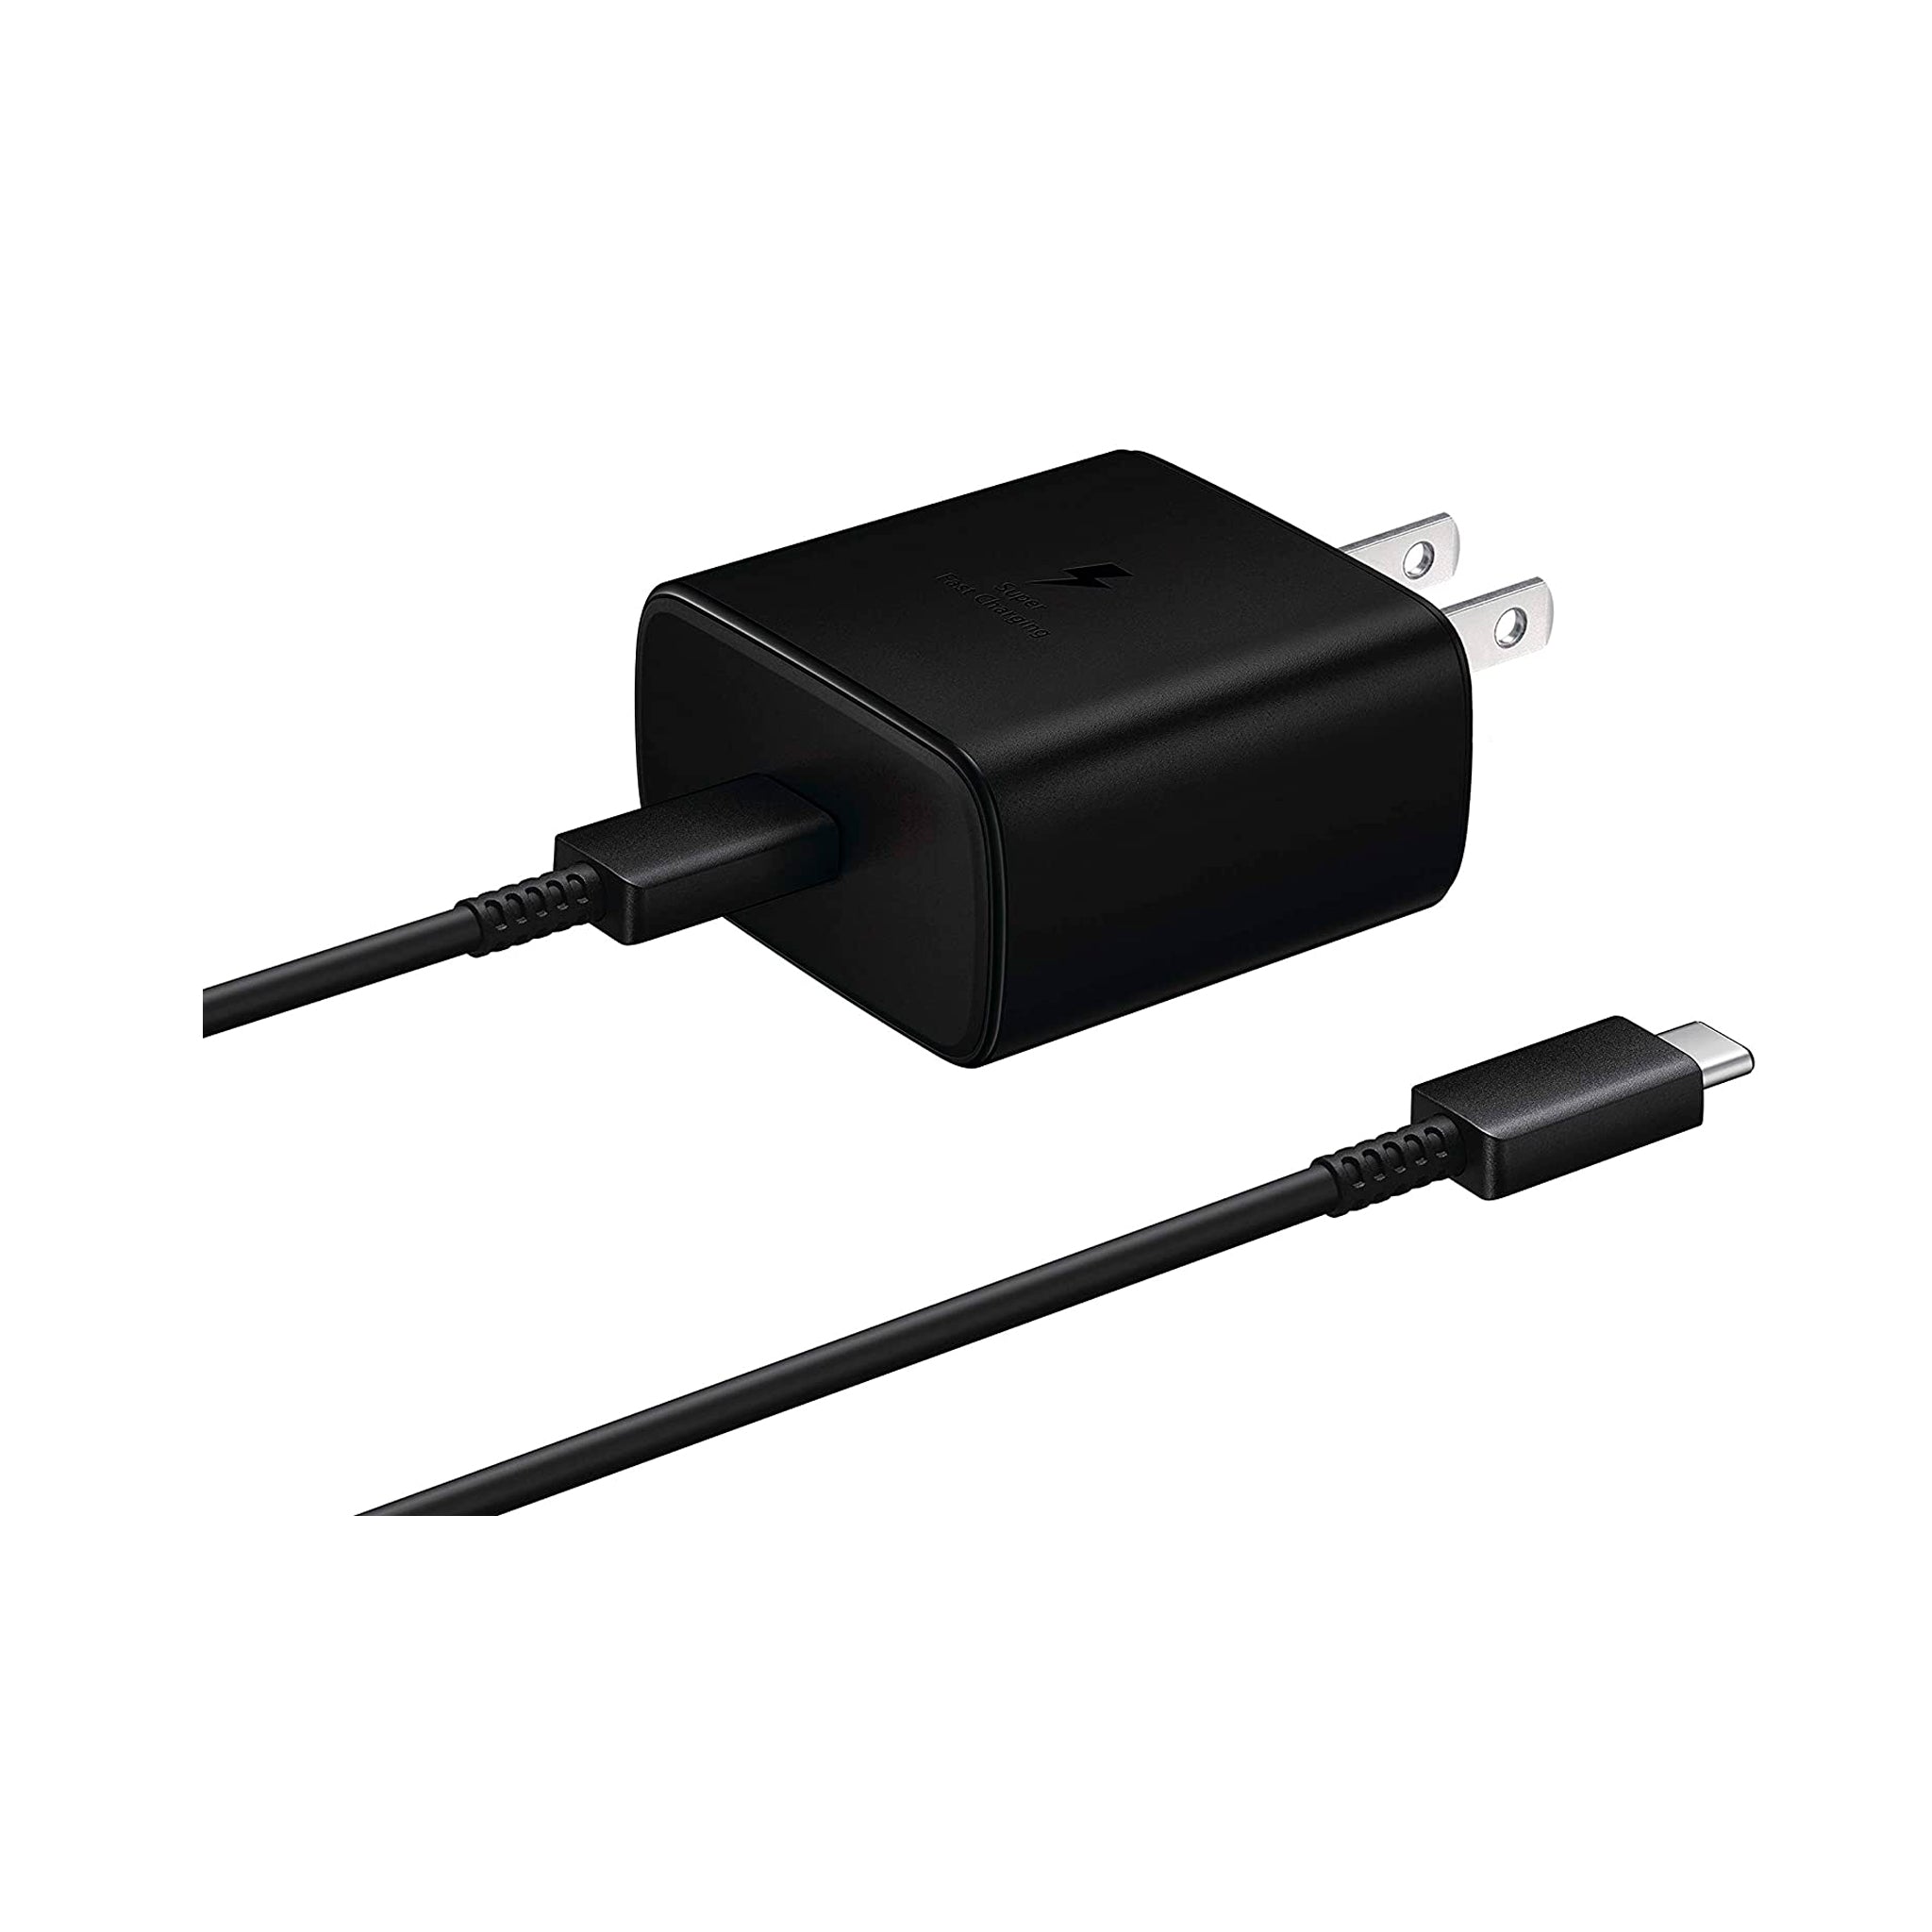 Samsung - Travel Charger with 45 Watt Super Fast Charge, 3amp , Type C to Type C Cable Included - Black